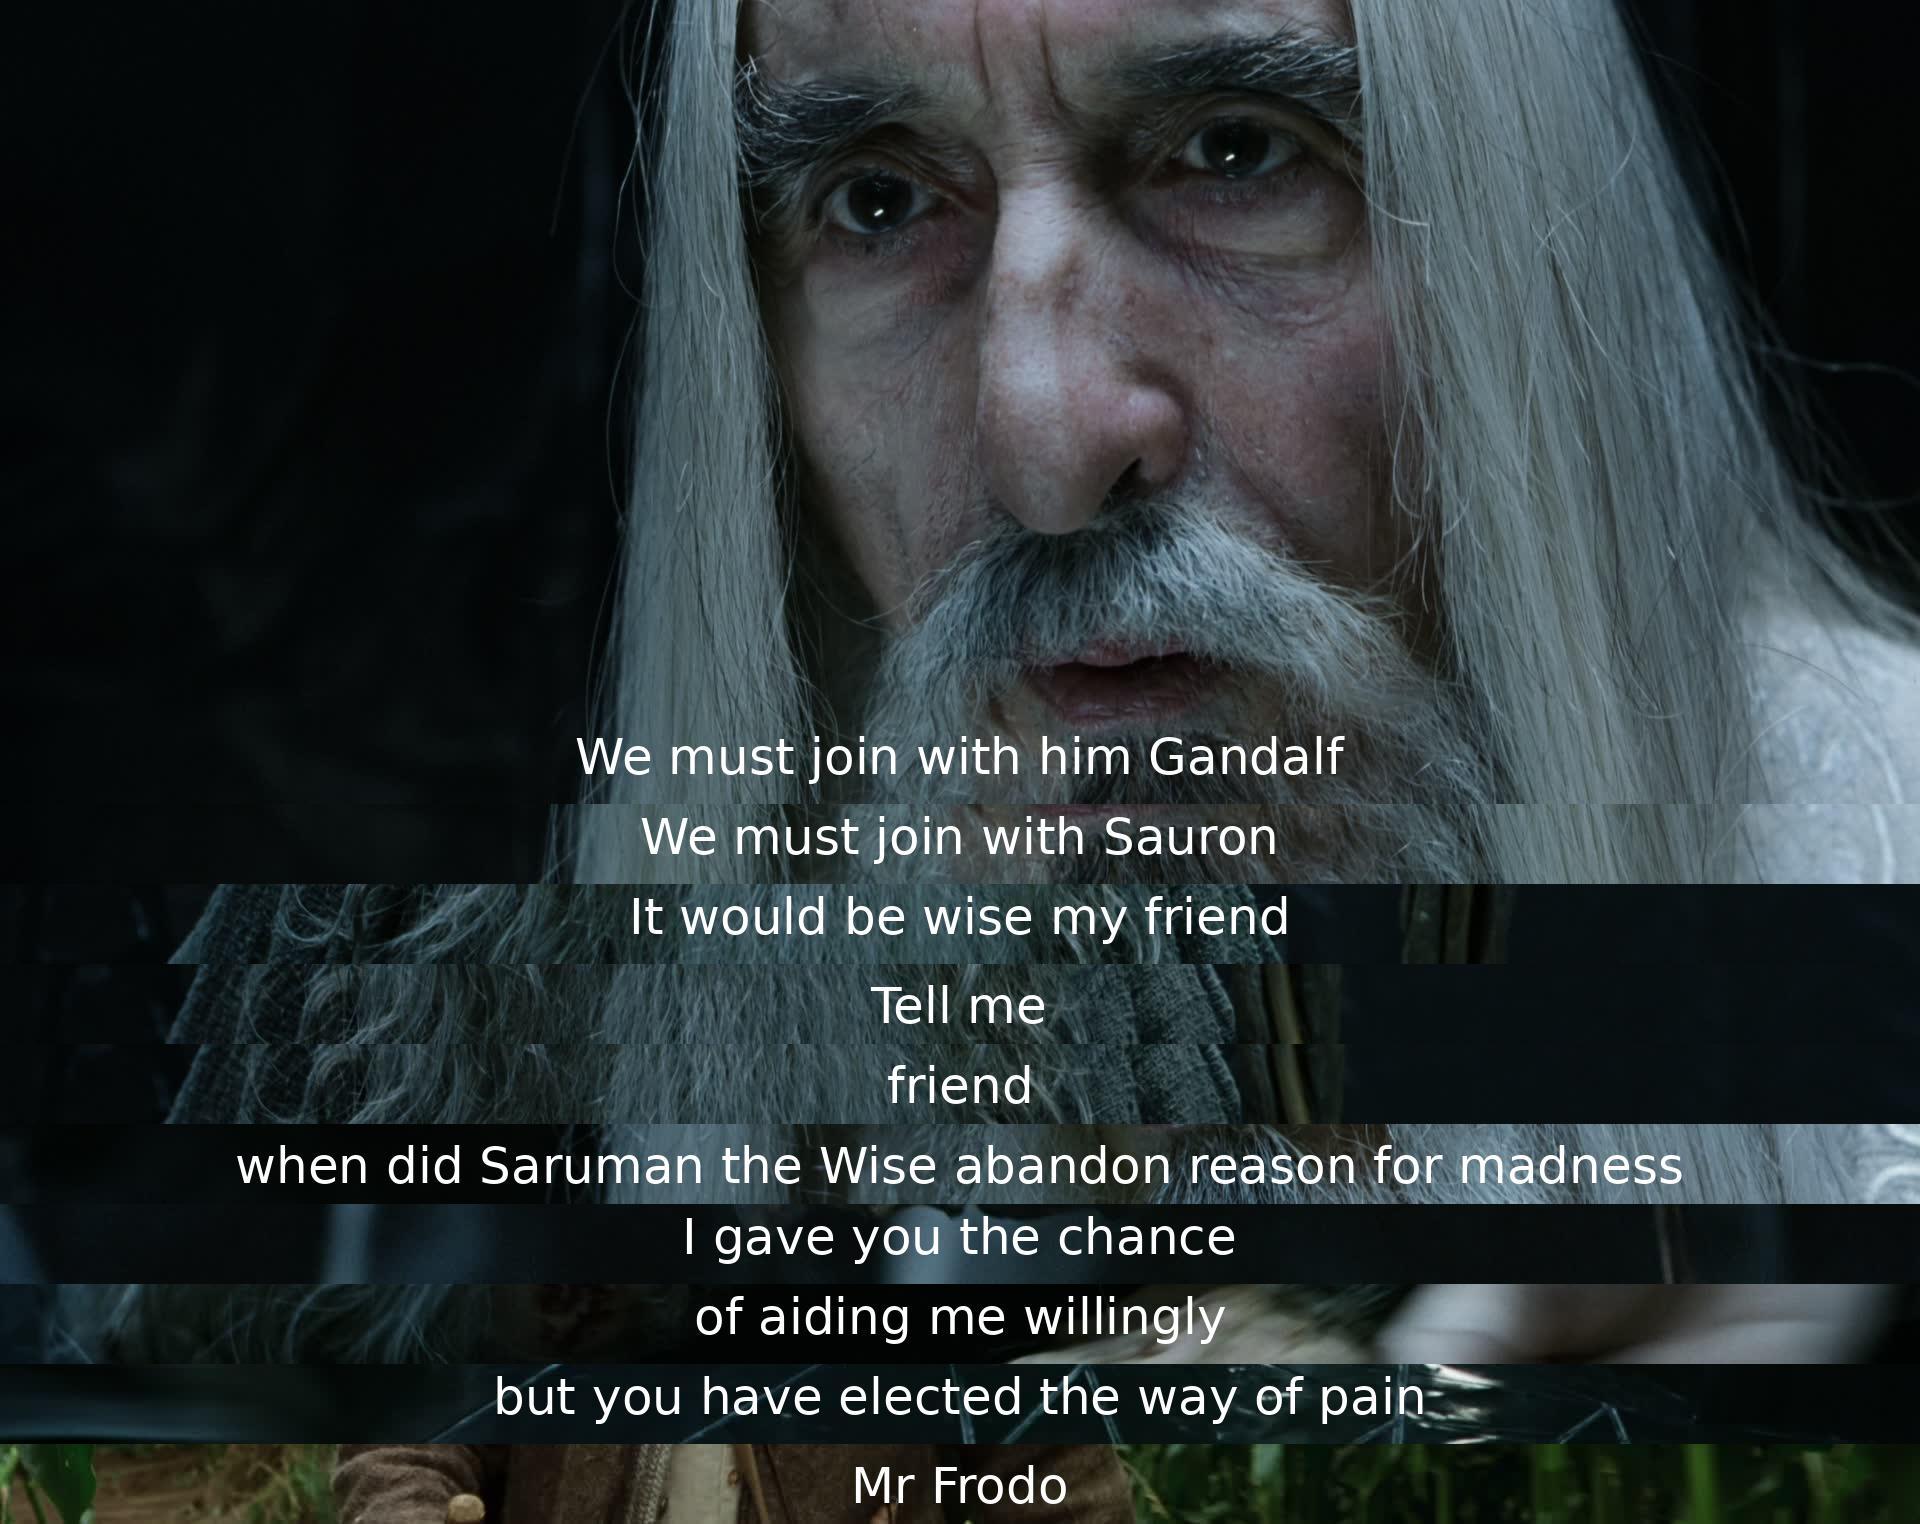 The characters are discussing whether to ally with Sauron. Gandalf questions Saruman's betrayal, offering him a chance to help willingly. Saruman chooses the path of pain. Frodo is mentioned at the end.